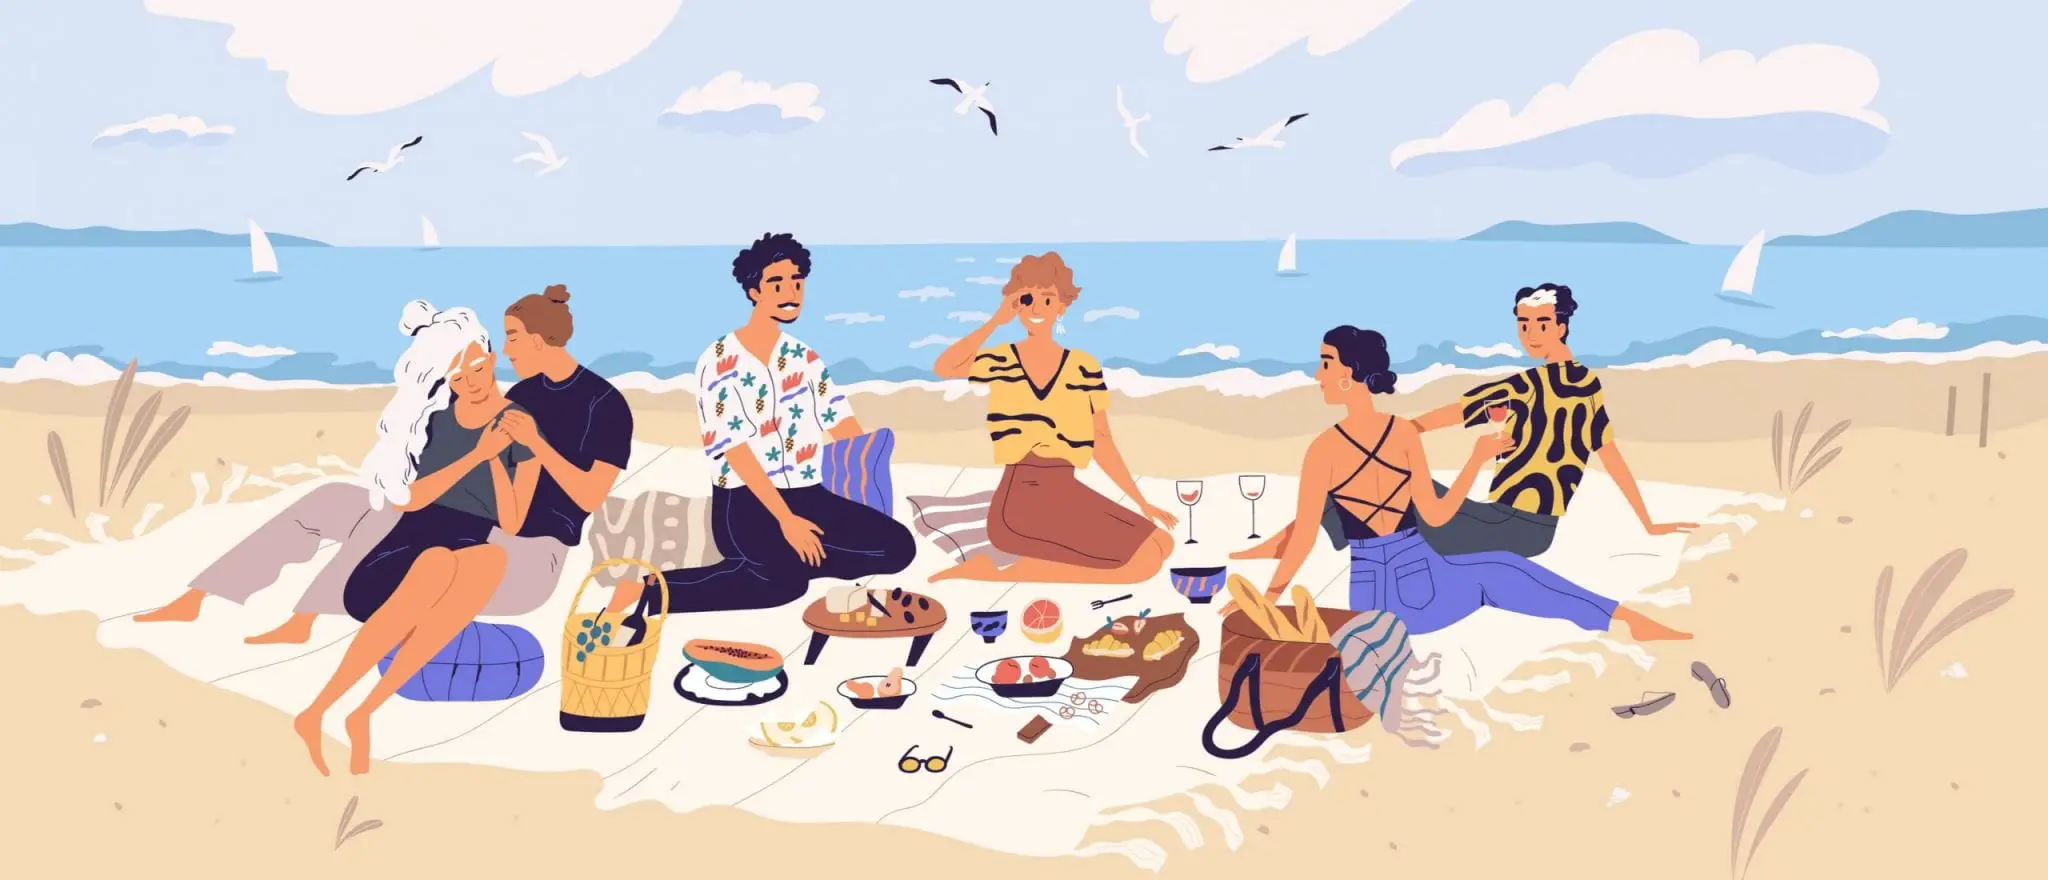 Group of Happy Friends at Picnic on Seashore. Young Smiling Men and Women Eating Food on Sandy Beach. Cute Funny People Having Lunch Together on Sea Shore